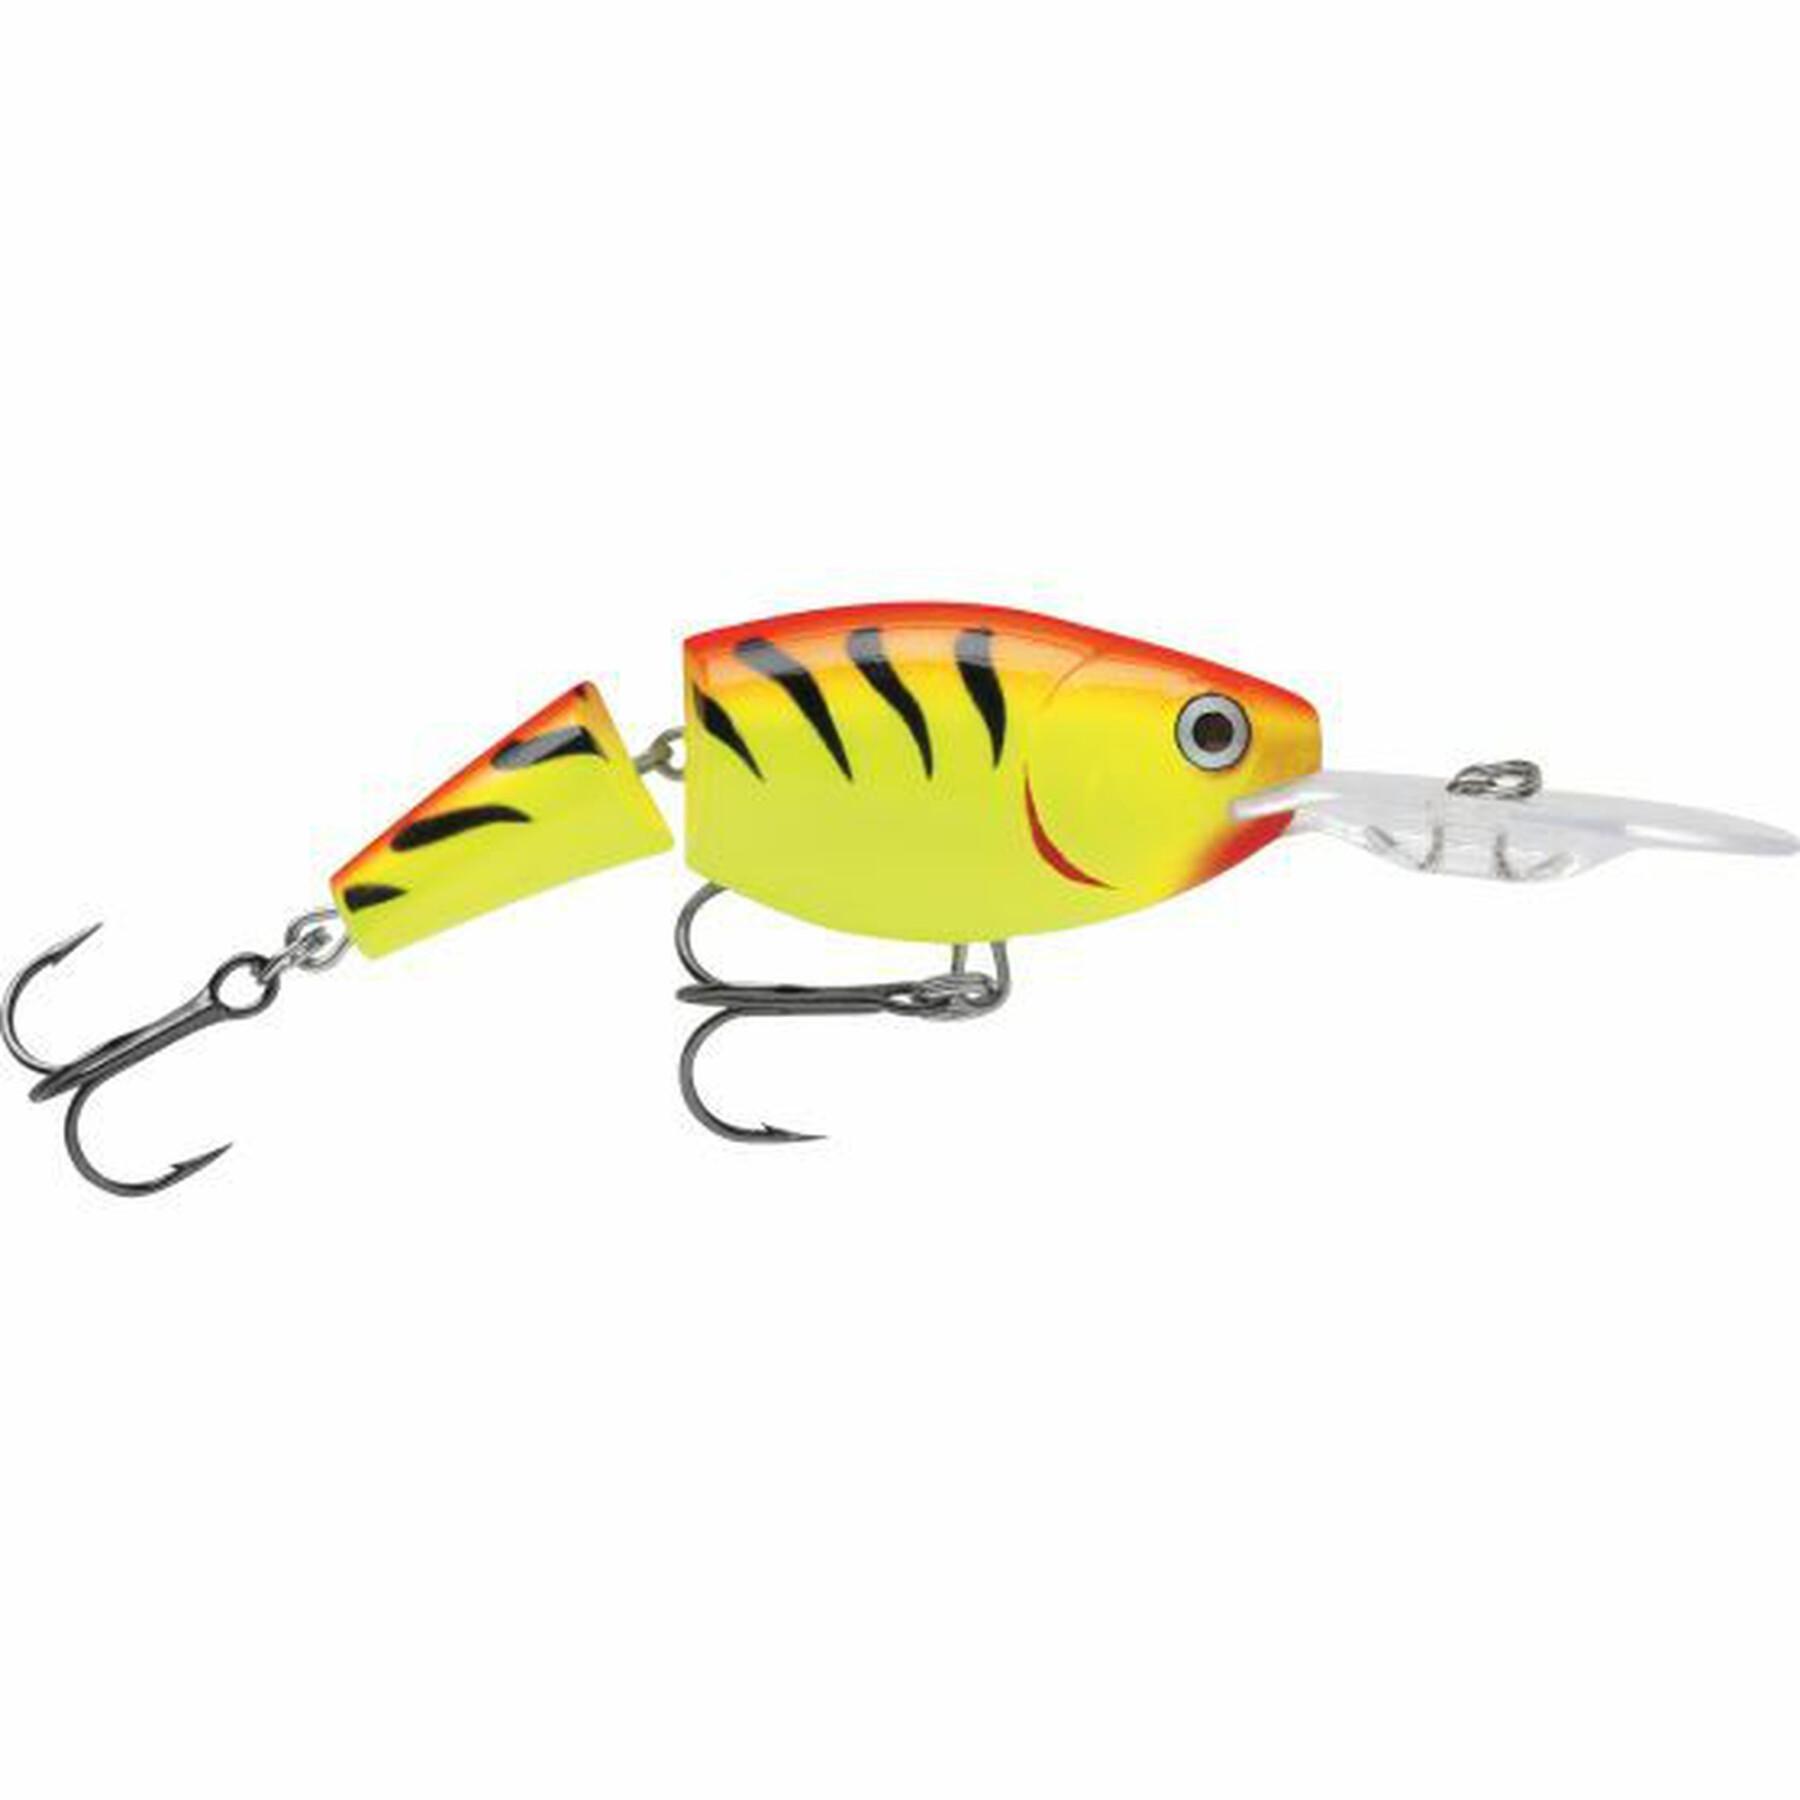 Suspending lure Rapala jointed shad rap 13g